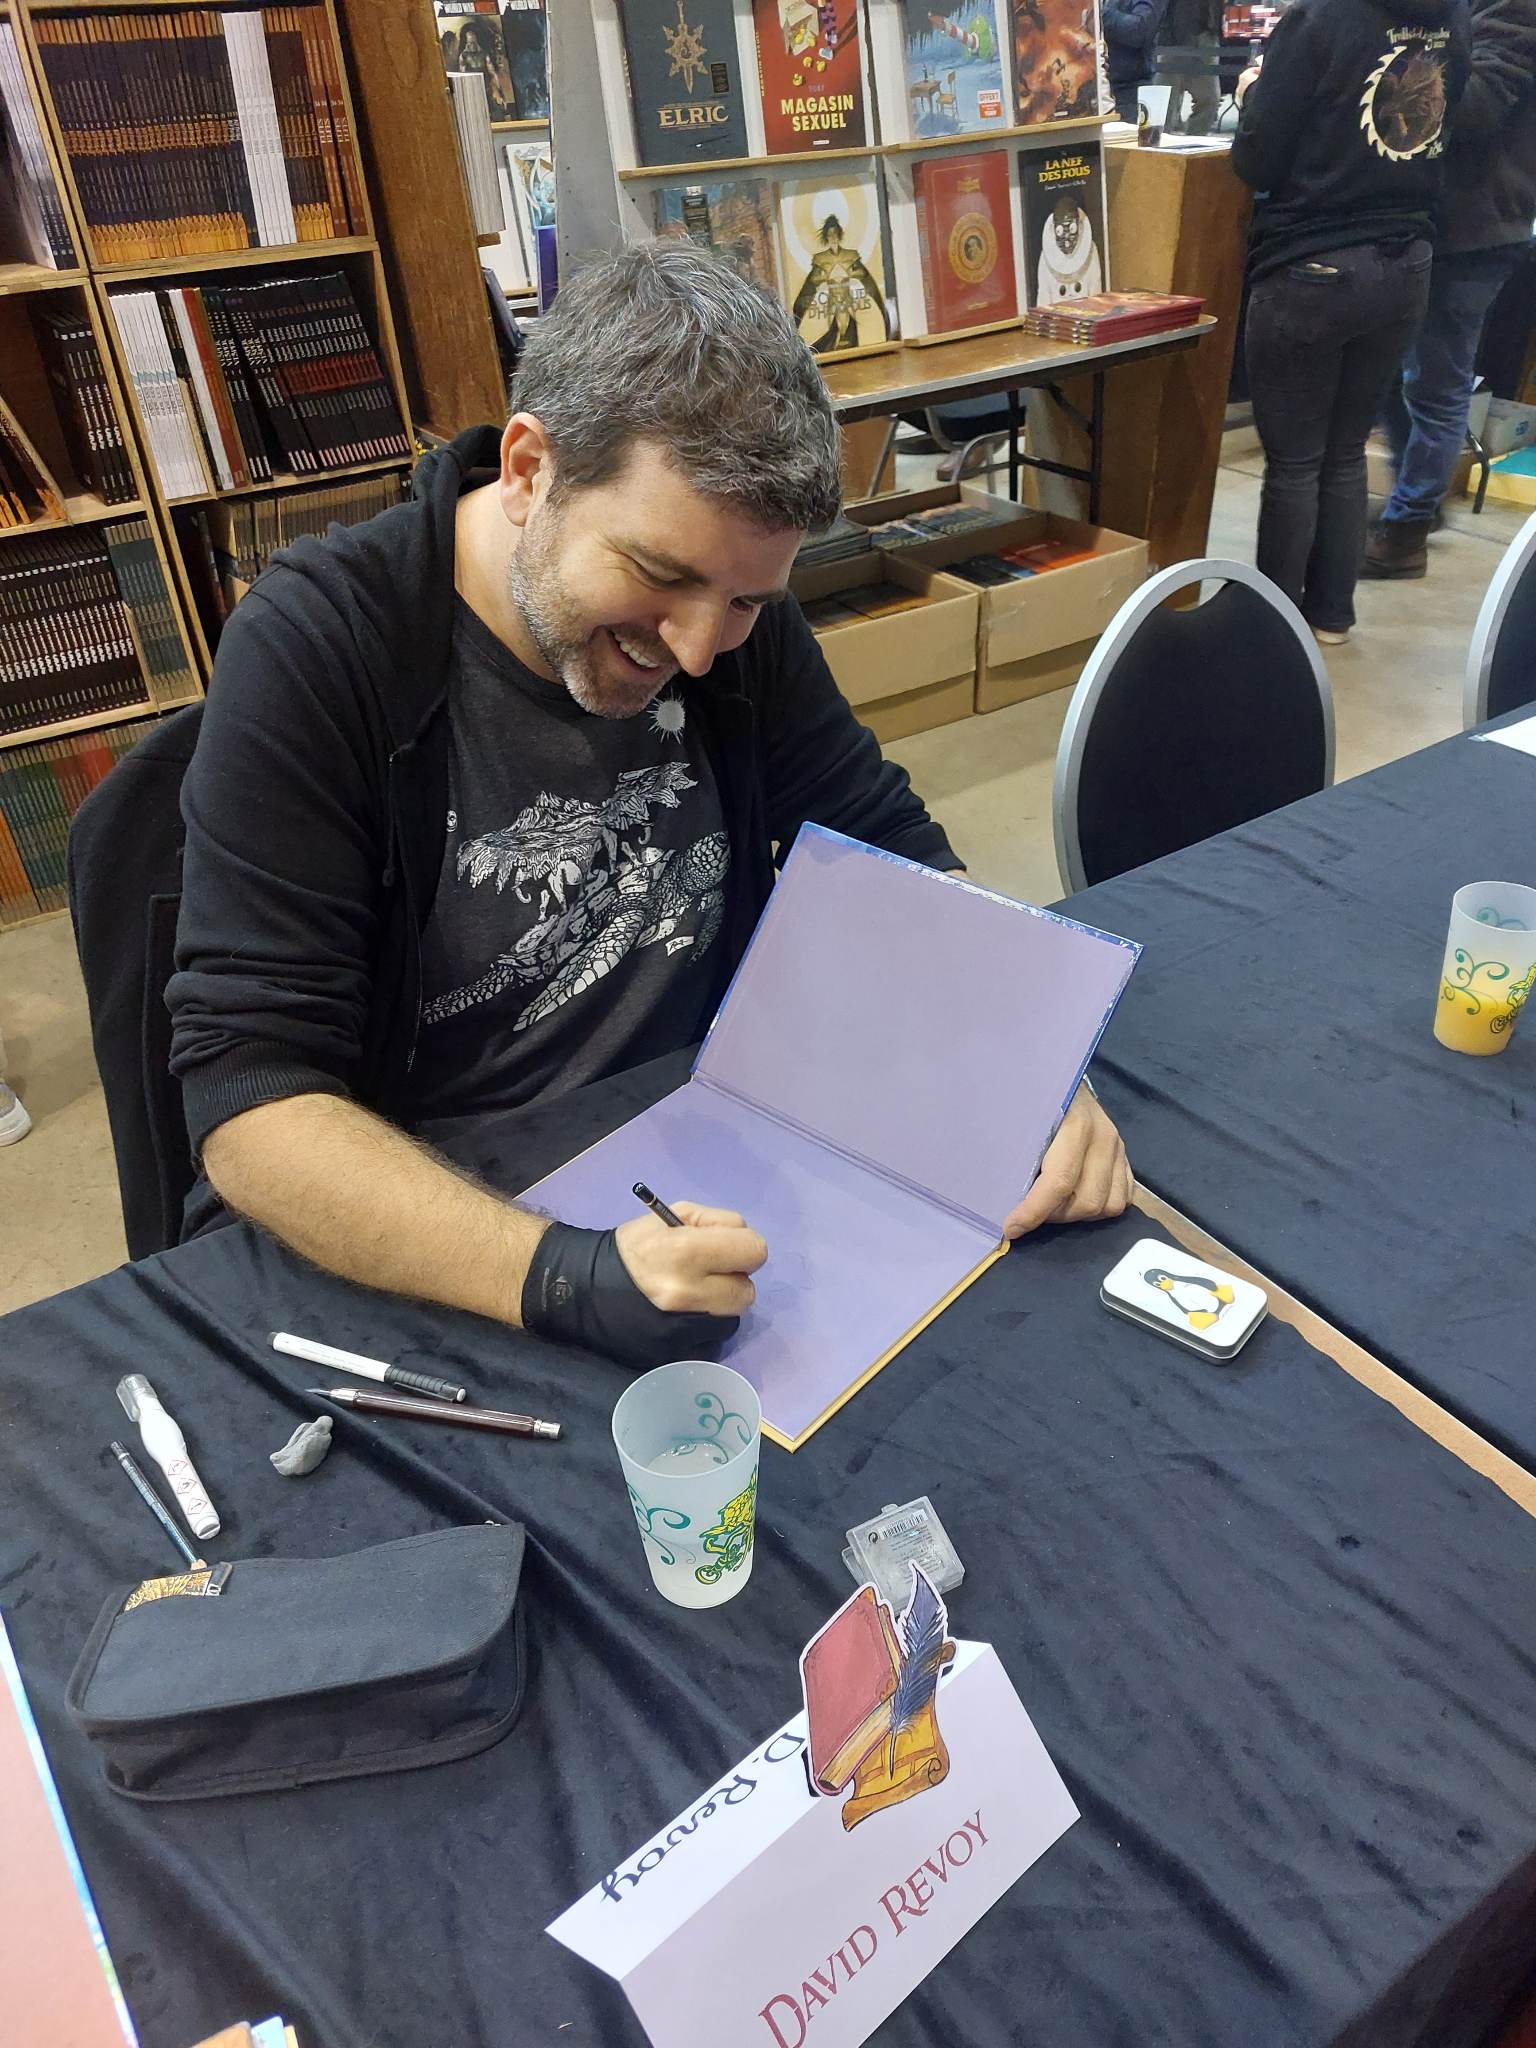 A photo of David Revoy, photo made from the point of view of a visitor at the start of having the book four of Pepper&Carrot signed at Trolls & Legendes Festival, in Mons Belgium, 2023. It's a top-down photograph in color made from a smartphone of a seated white person around 40 years old smiling and happy, with a short beard and a mix of brown and white hair. He wears a tee shirt with the great Great A'Tuin (Discworld, T.Pratchett), and also wears a glove for drawing (synthetic, black) and starts to doodle into a book open. The book is Pepper&Carrot four by Glénat, with its dark violet colors in the introduction. The table has drawing material on it (Tipp-Ex, Pierre Noire, white markers, and a kneaded eraser), a little box with a tux sticker on it, a glass of water, and the table are covered with fabric in black. A label "David Revoy" is on the front to indicate the booth to the visitor. In the background: the library shop of the Festival with many comic books. Photo CC-By 4.0 Steph Vesch.